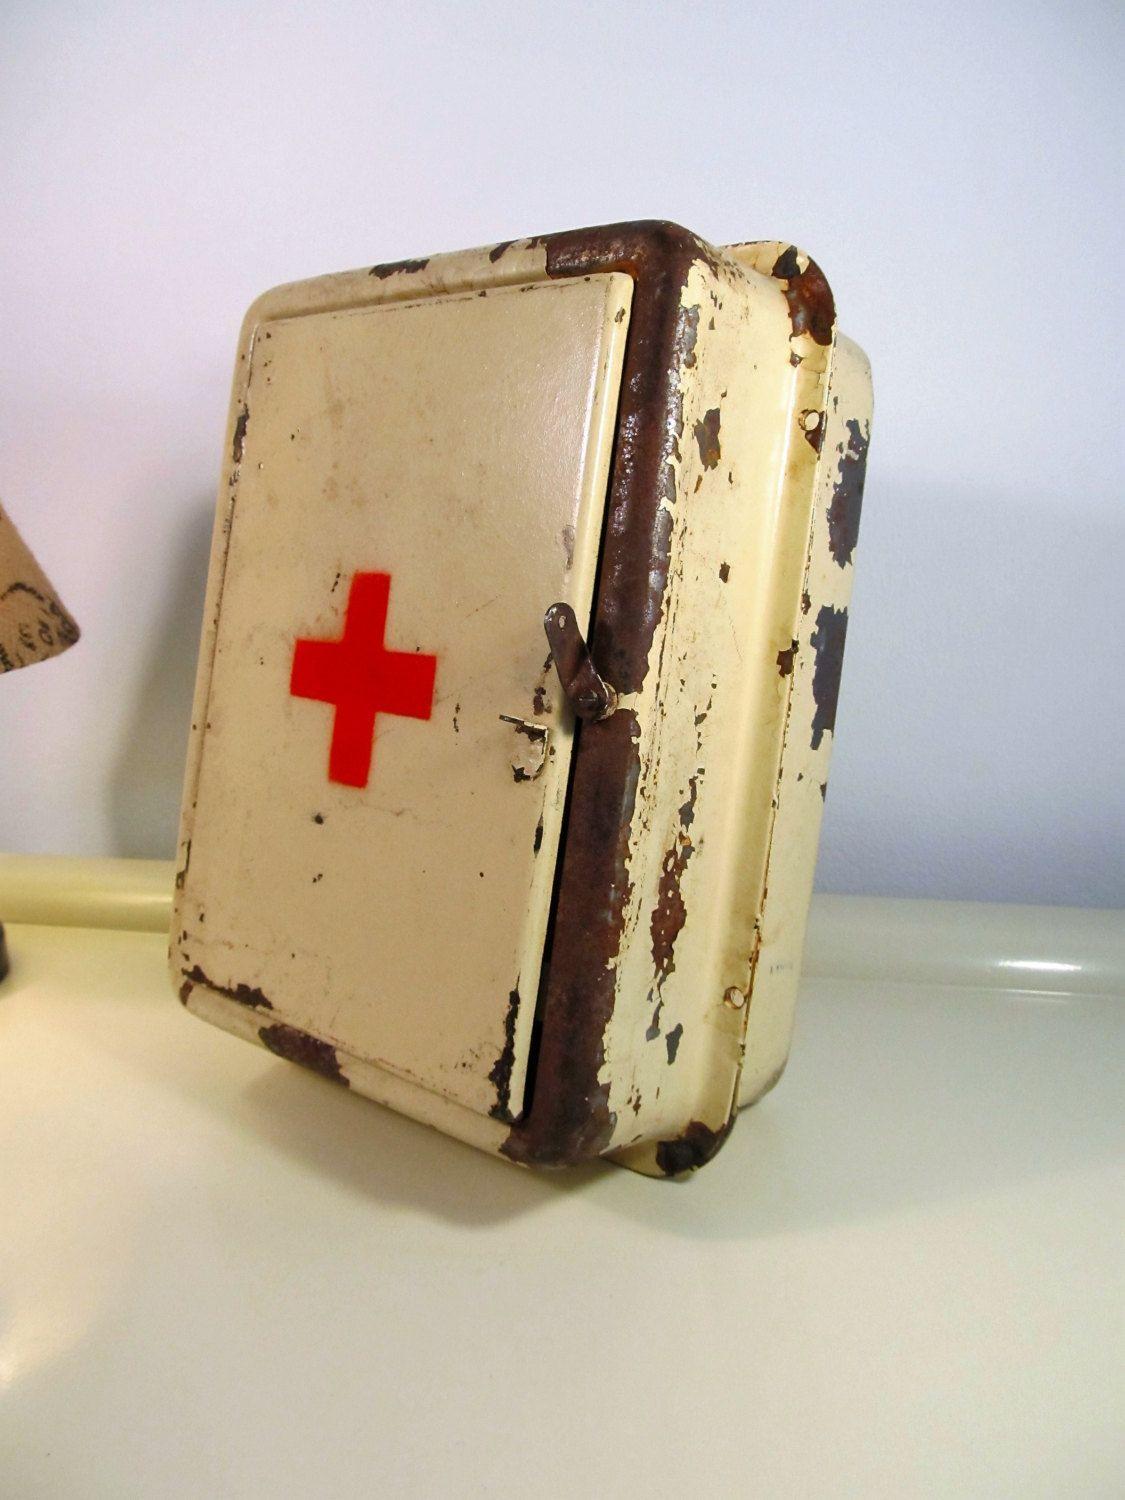 Military Medical Cross Logo - Vintage German Military Medical Red Cross First Aid Kit, Antique